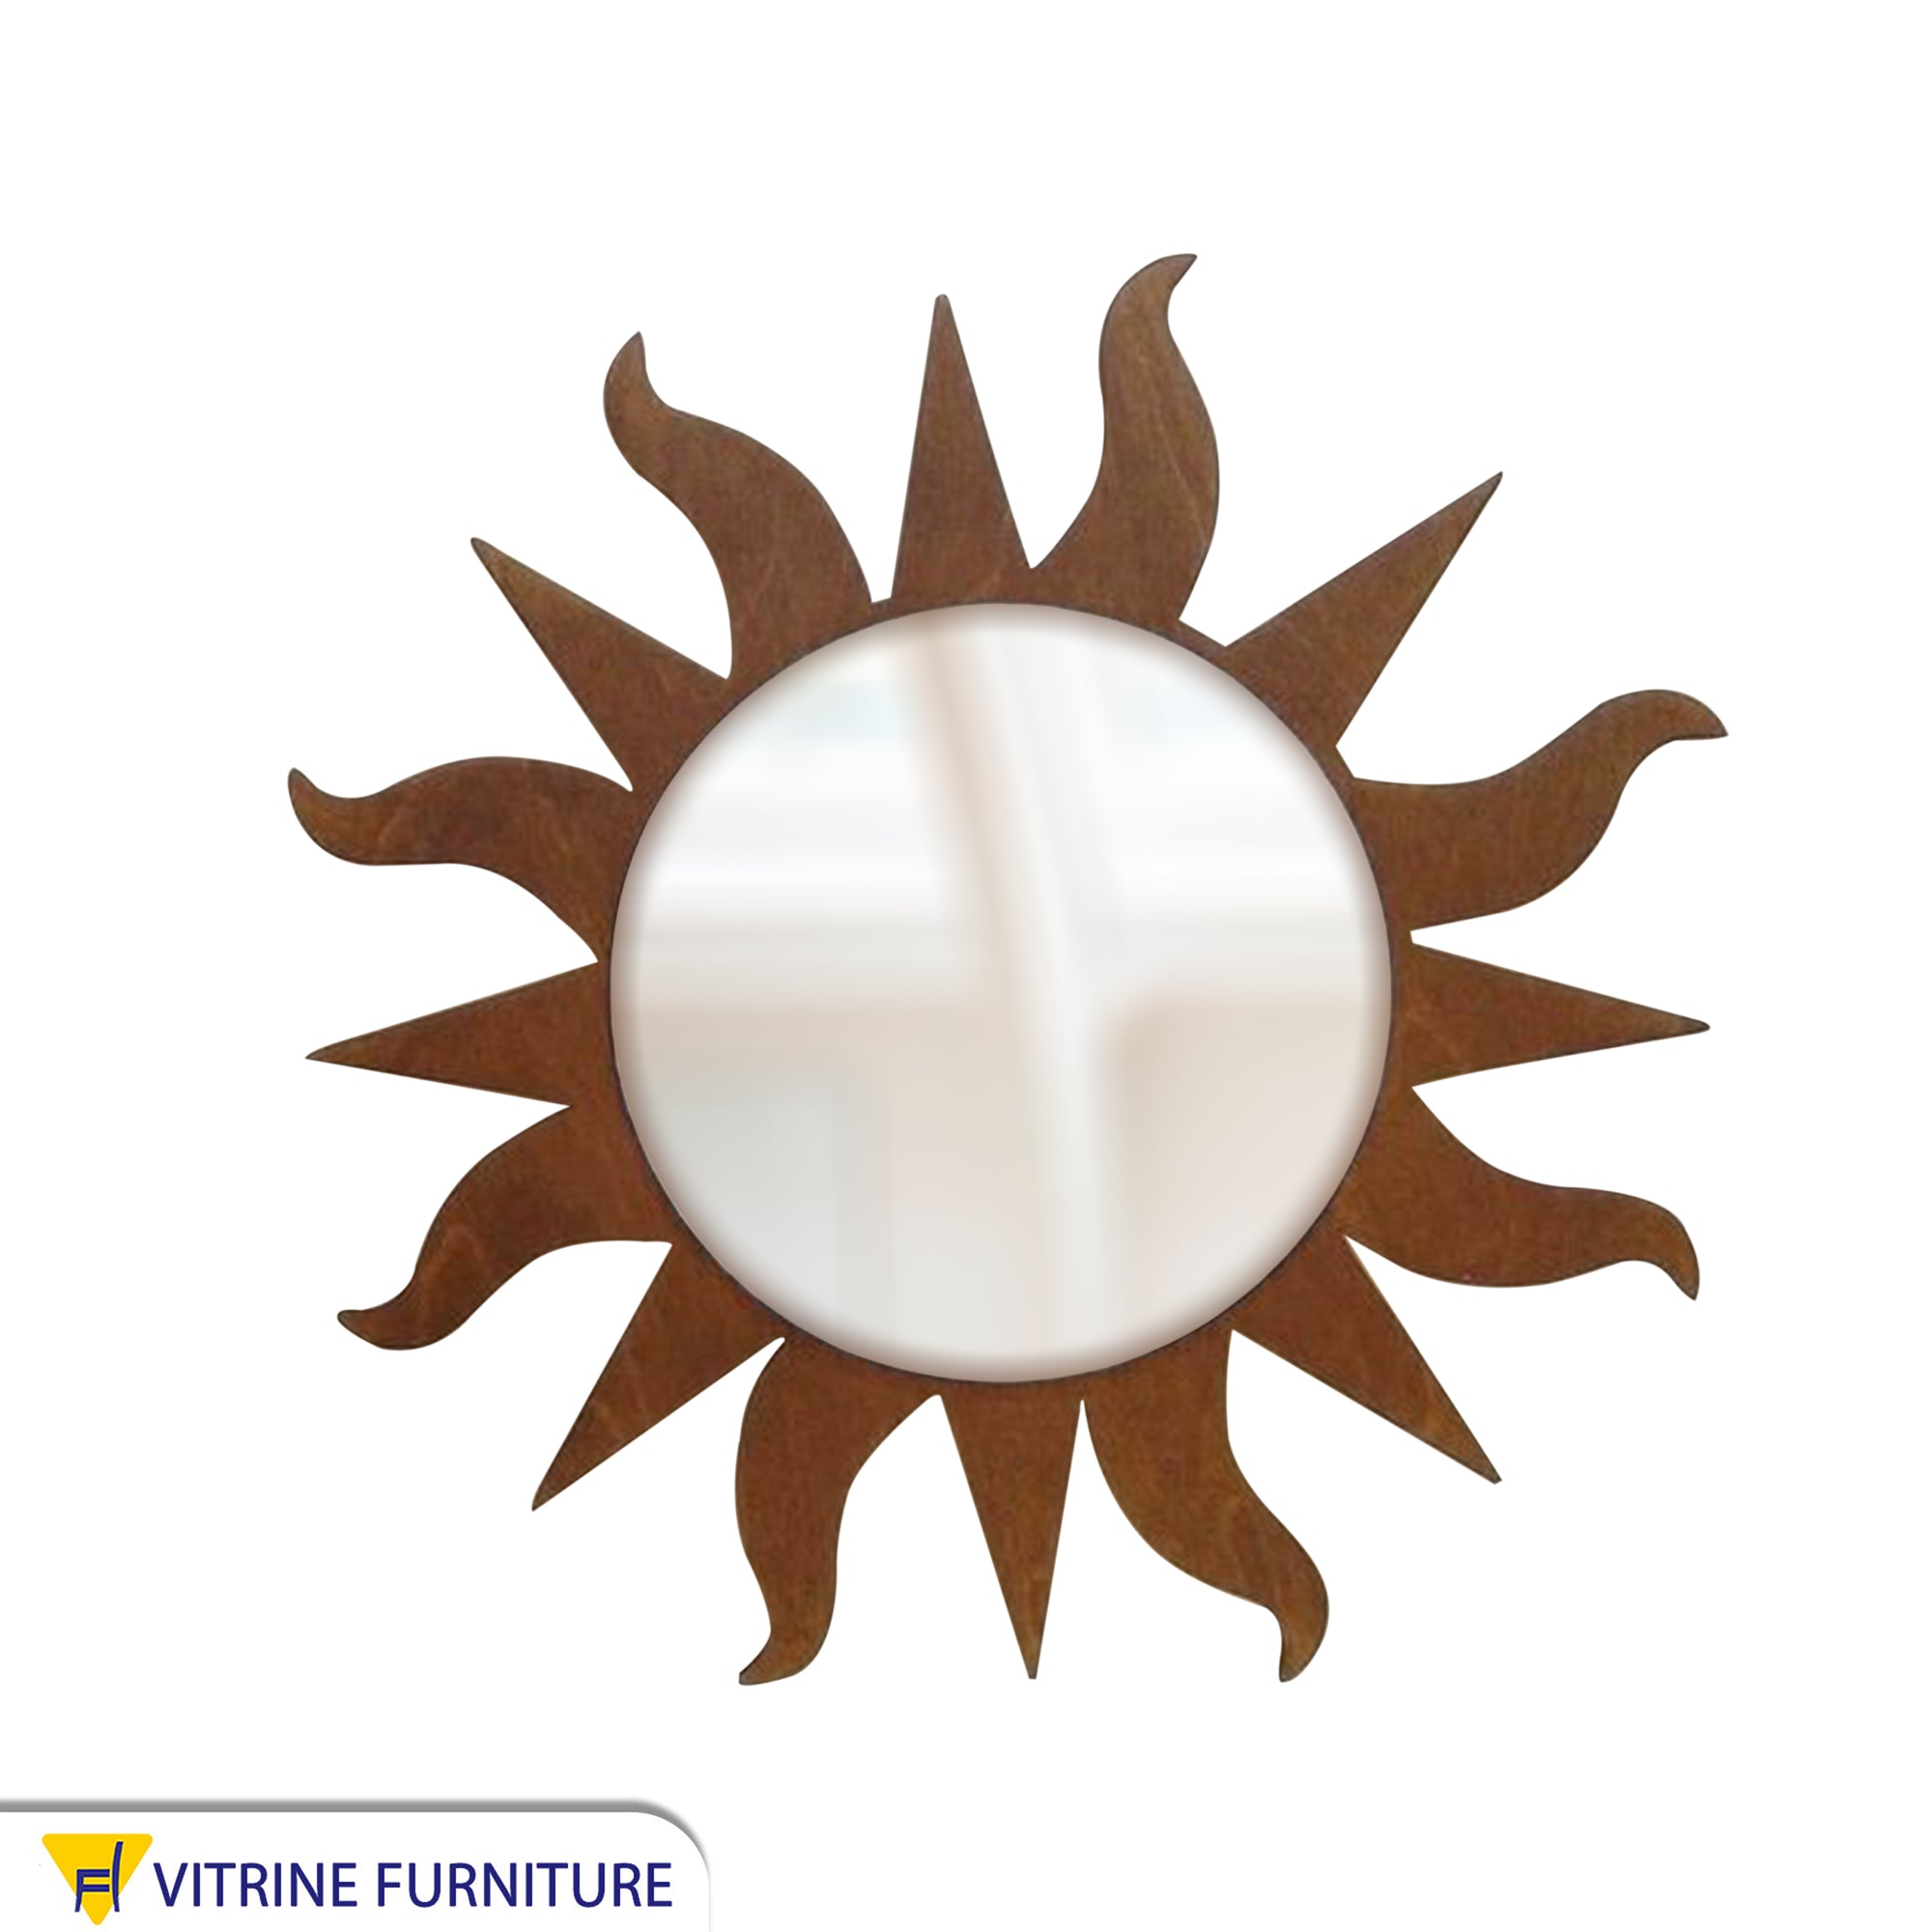 Mirrors with a brown frame in the shape of the sun